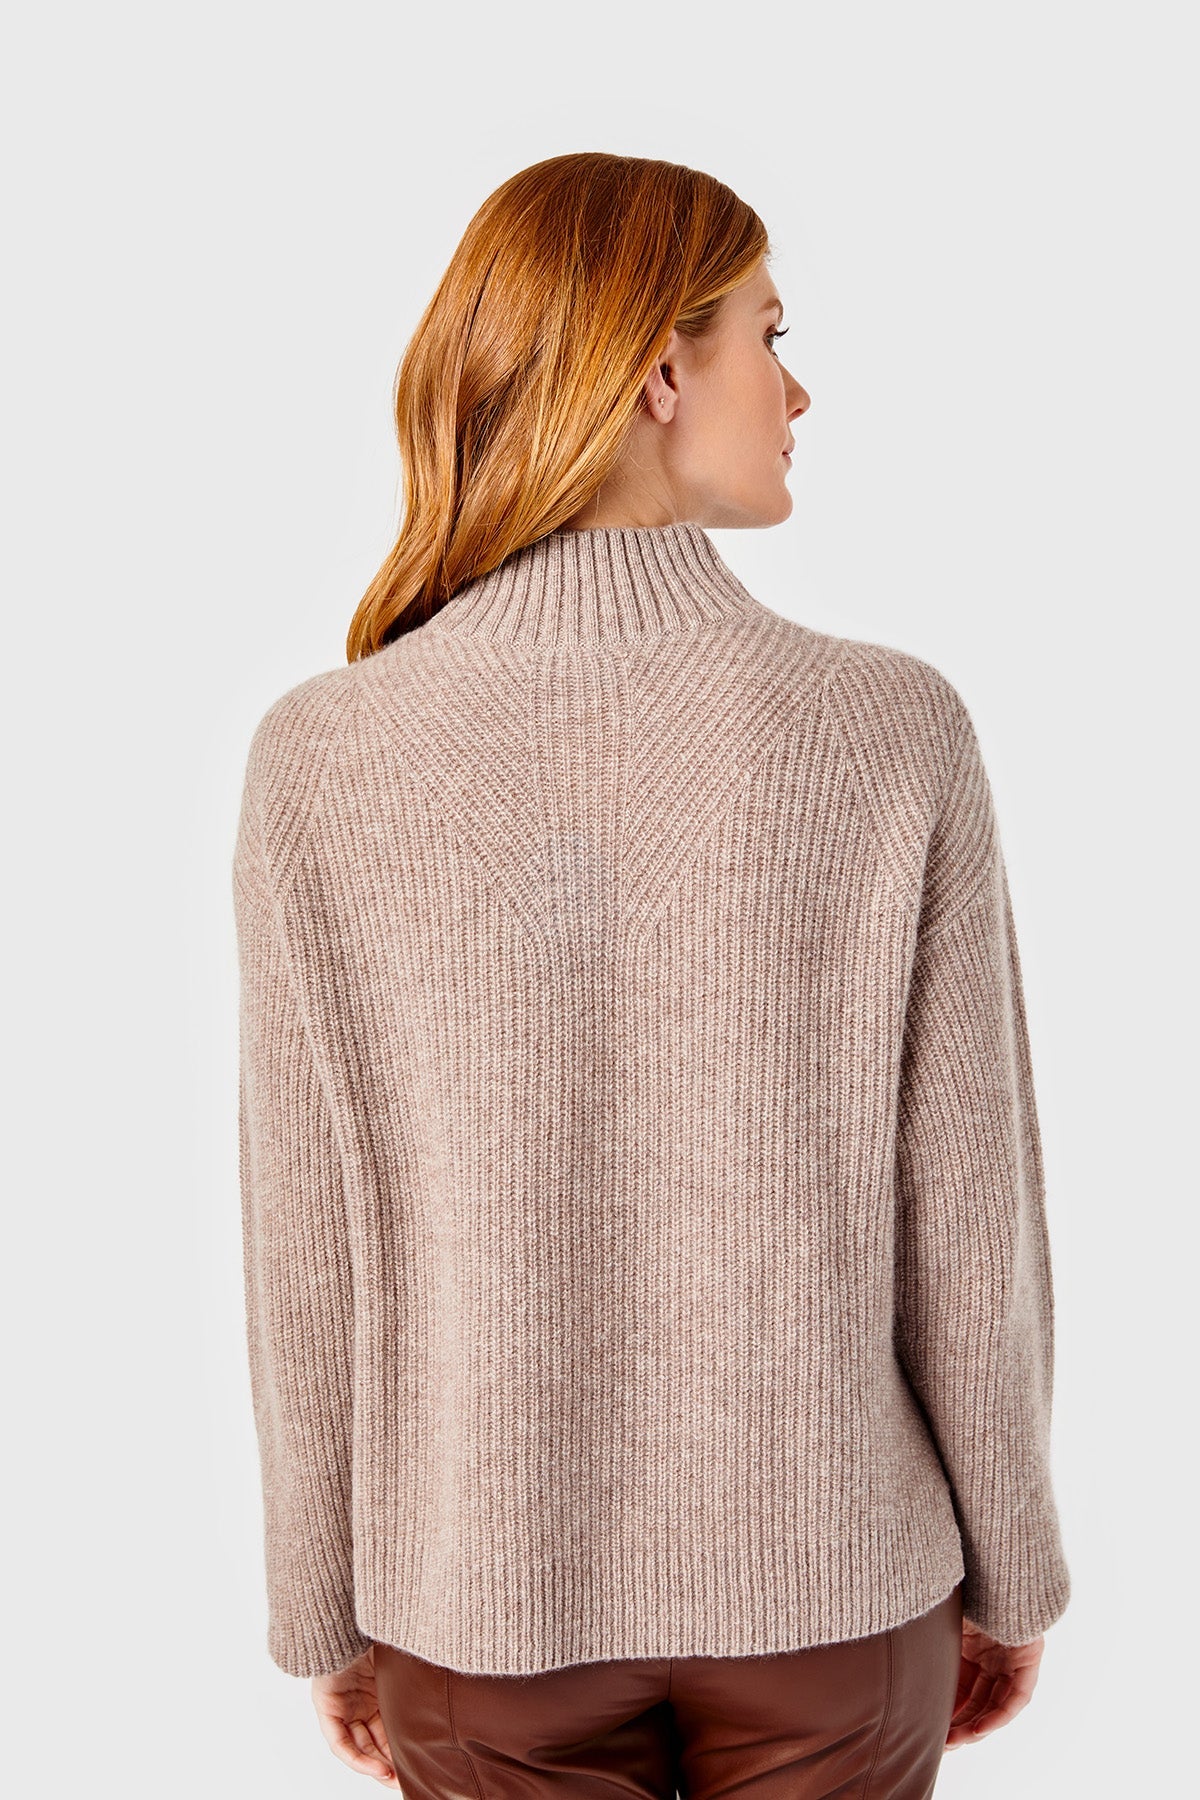 Harriet Sweater-Cashmere-Marled Biscuit by Cartolina